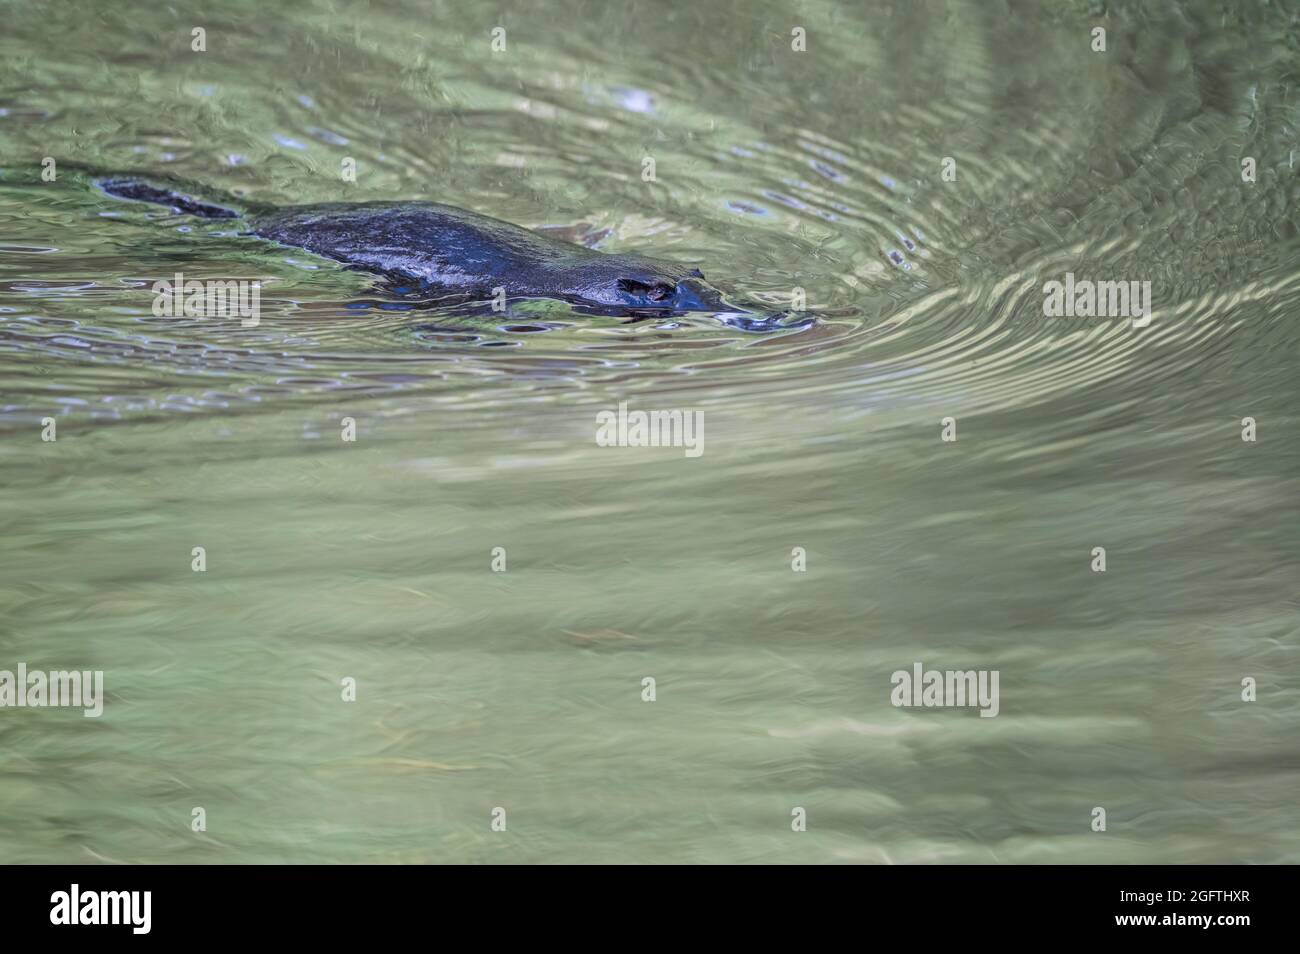 A single Platypus(Ornithorhynchus) floats on the stream's surface in Yungaburra preserve on the Atherton Tablelands, Queensland, Australia. Stock Photo